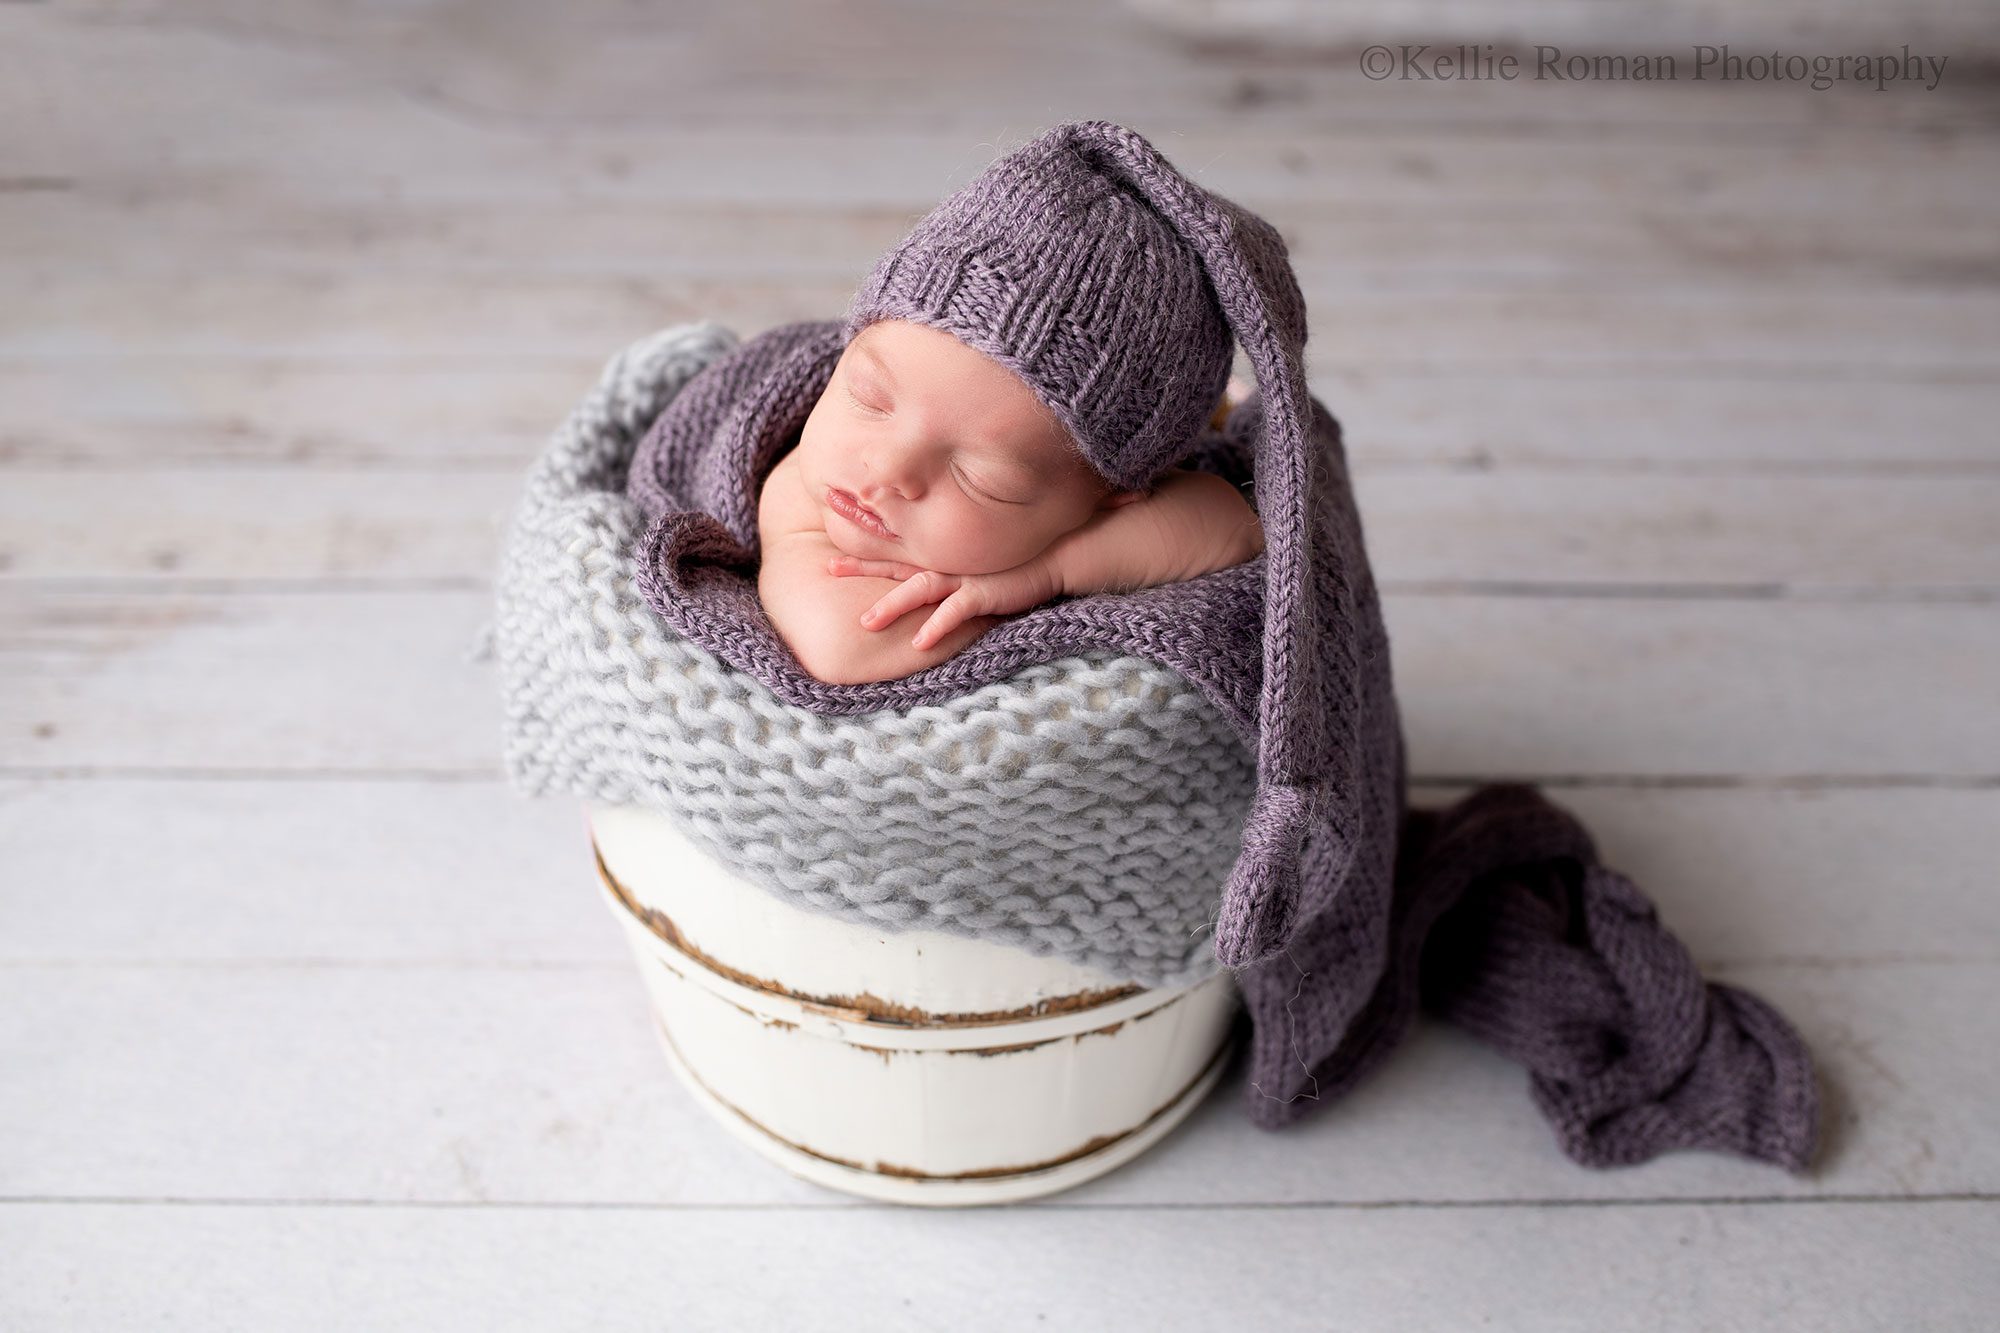 newborn photography milwaukee. a newborn baby girl is sleeping in a white wood bucket. baby has her chin resting on her arms and hands and is wearing a purple sleepy hat. the wood bucket has layers of grey and purple fabrics in it. 
